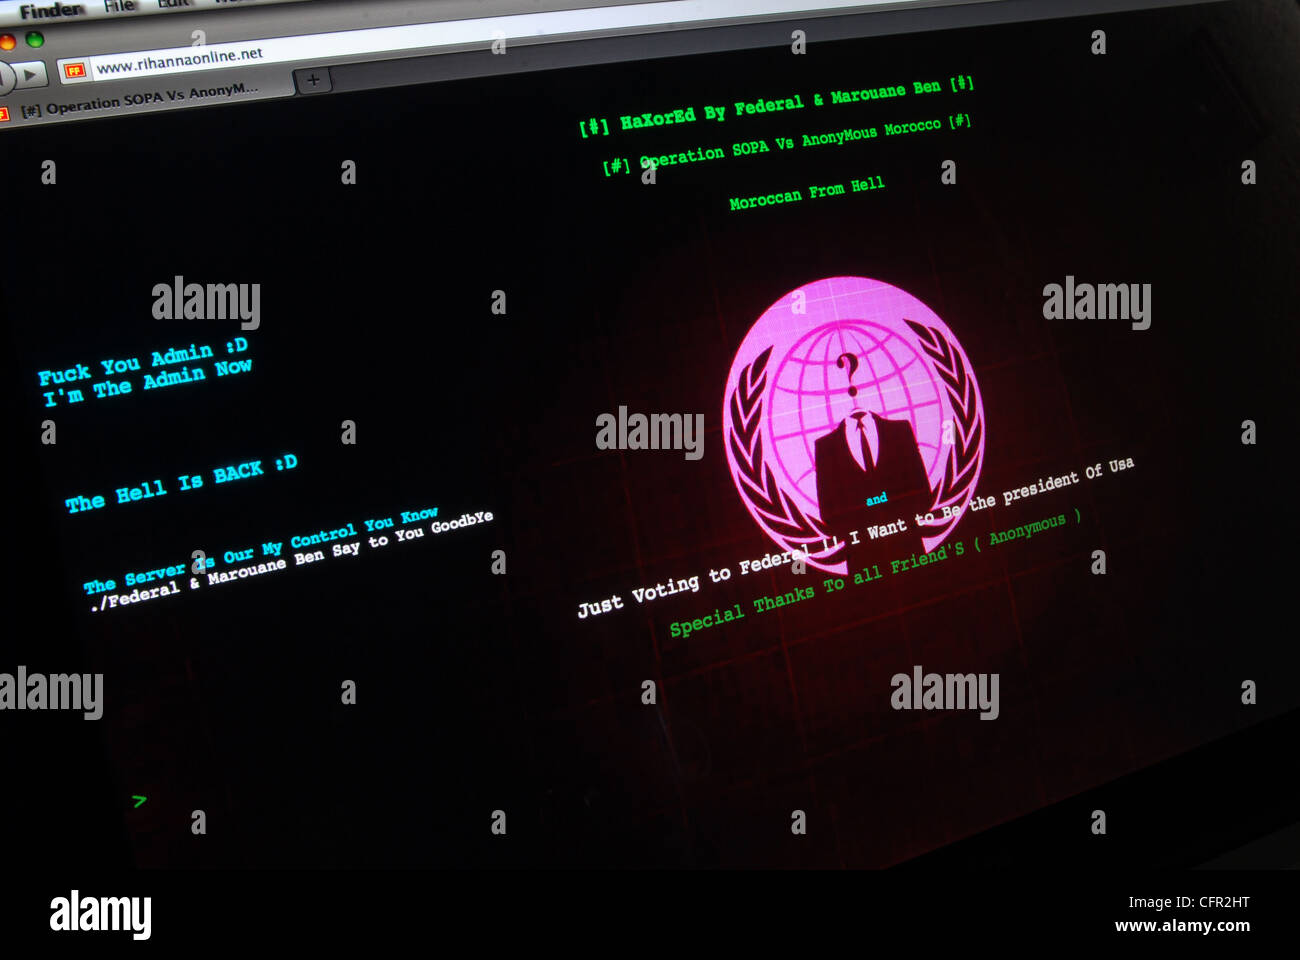 Hacked web site home page displaying message from worldwide hacker group Anonymous. Stock Photo